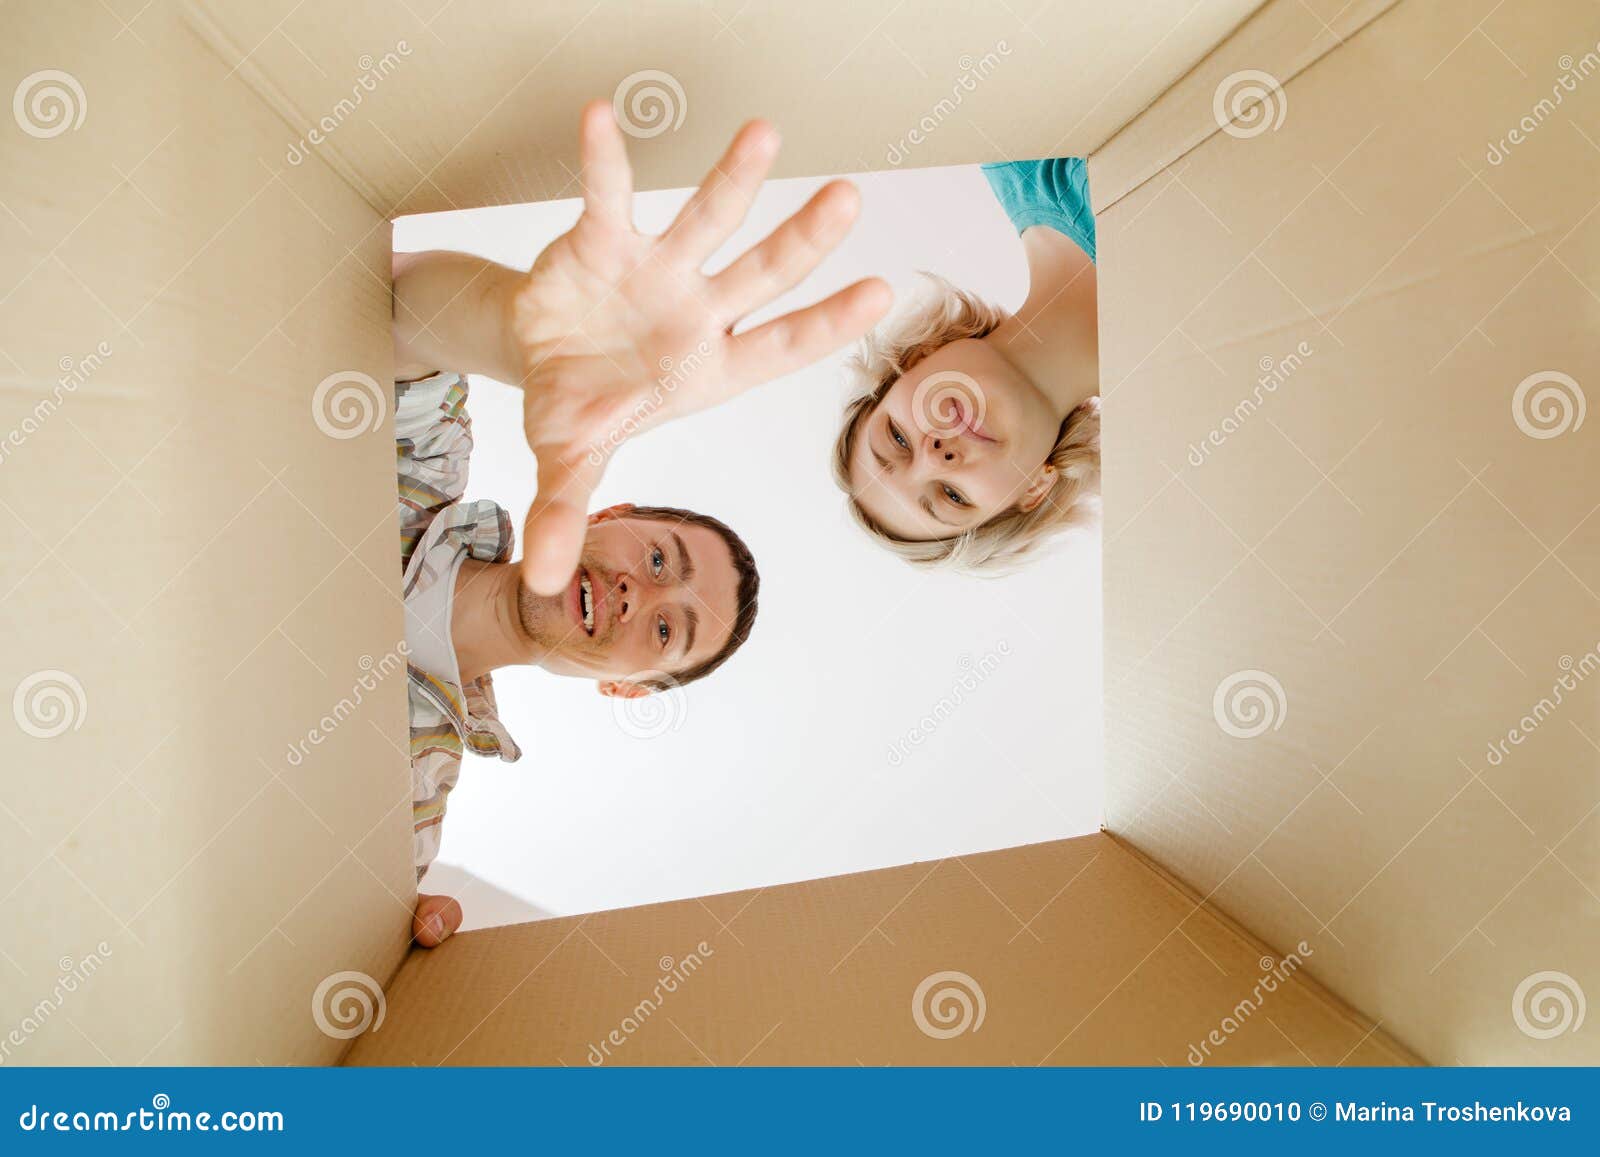 picture of man and woman peering into cardboard box